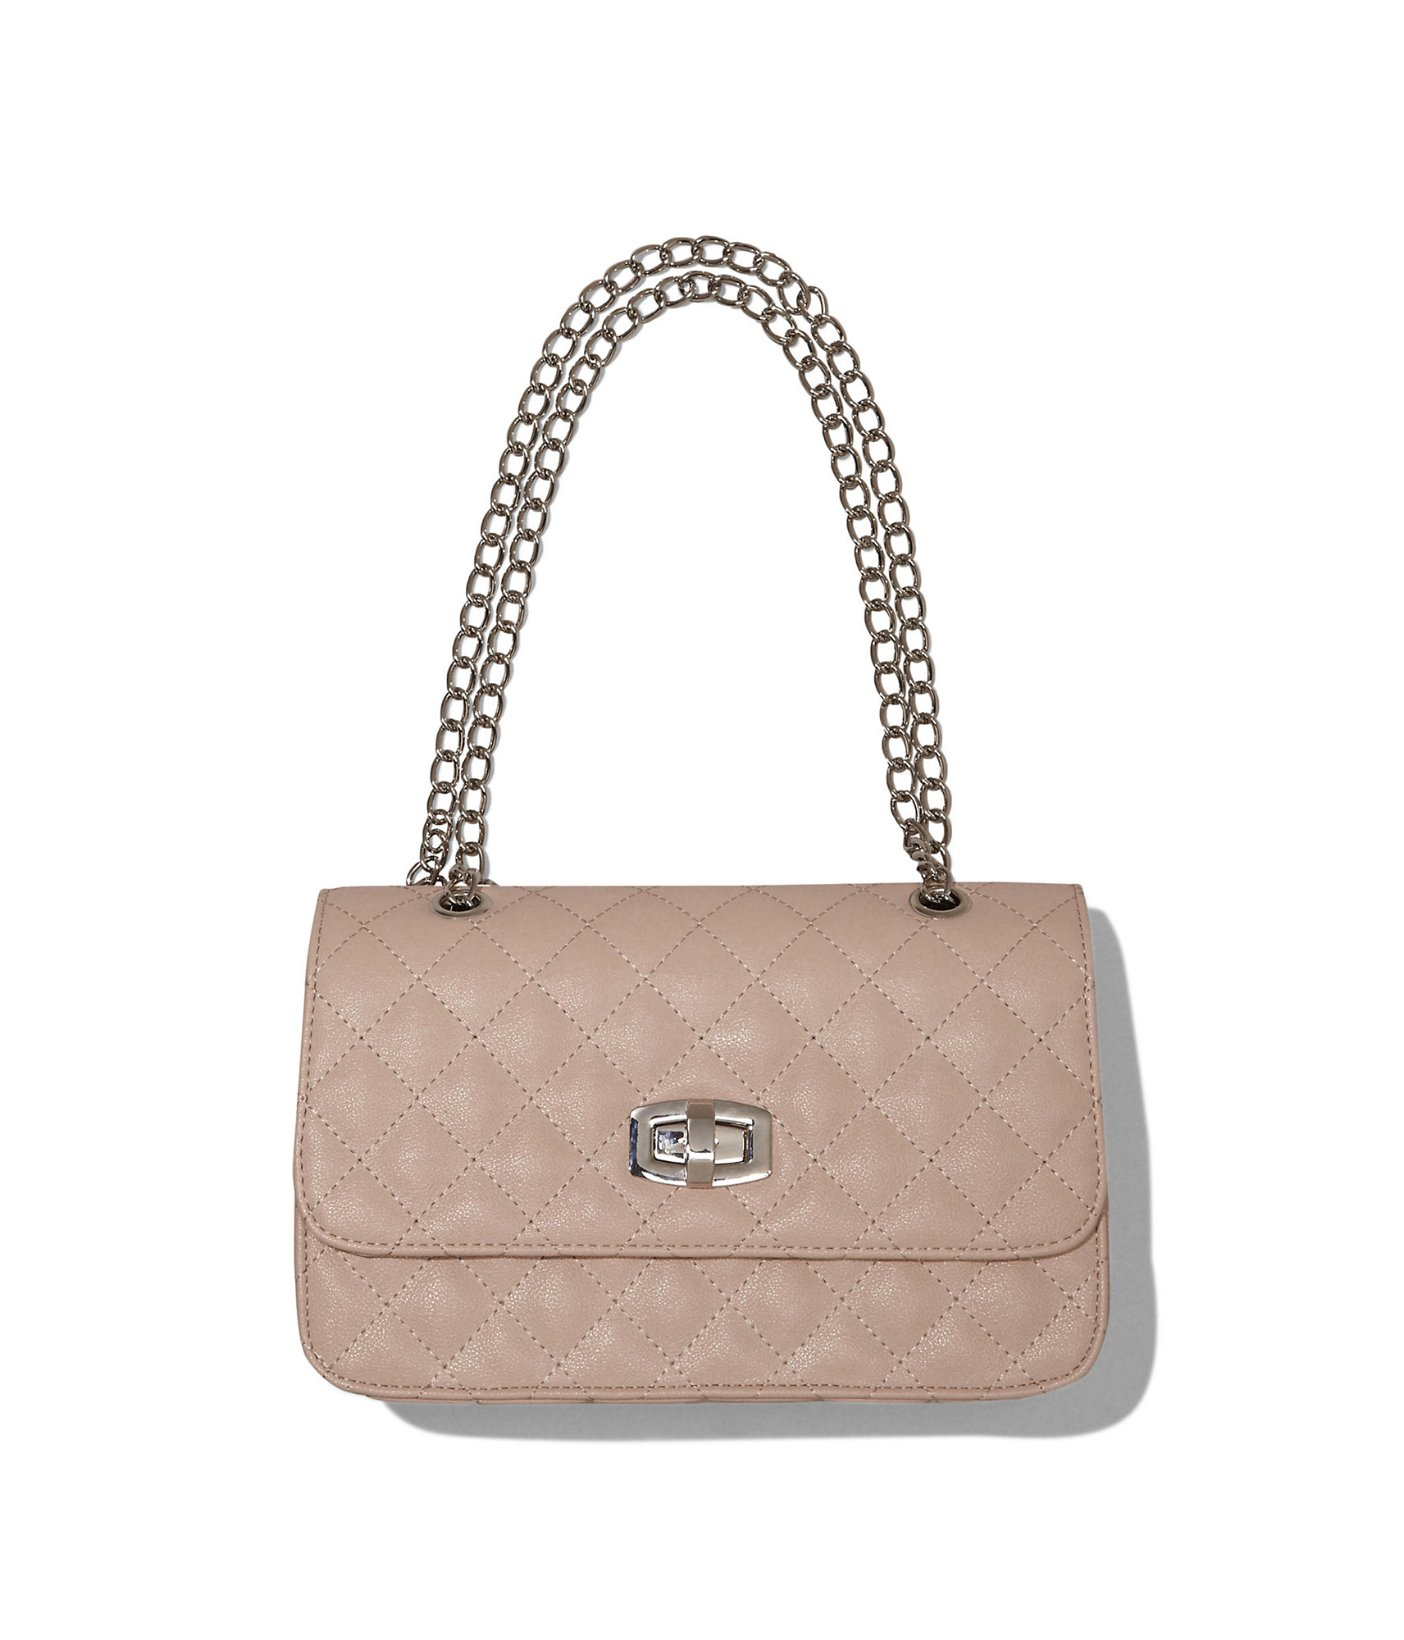 Express Quilted Chain Strap Shoulder Bag in Beige (NUDE) | Lyst